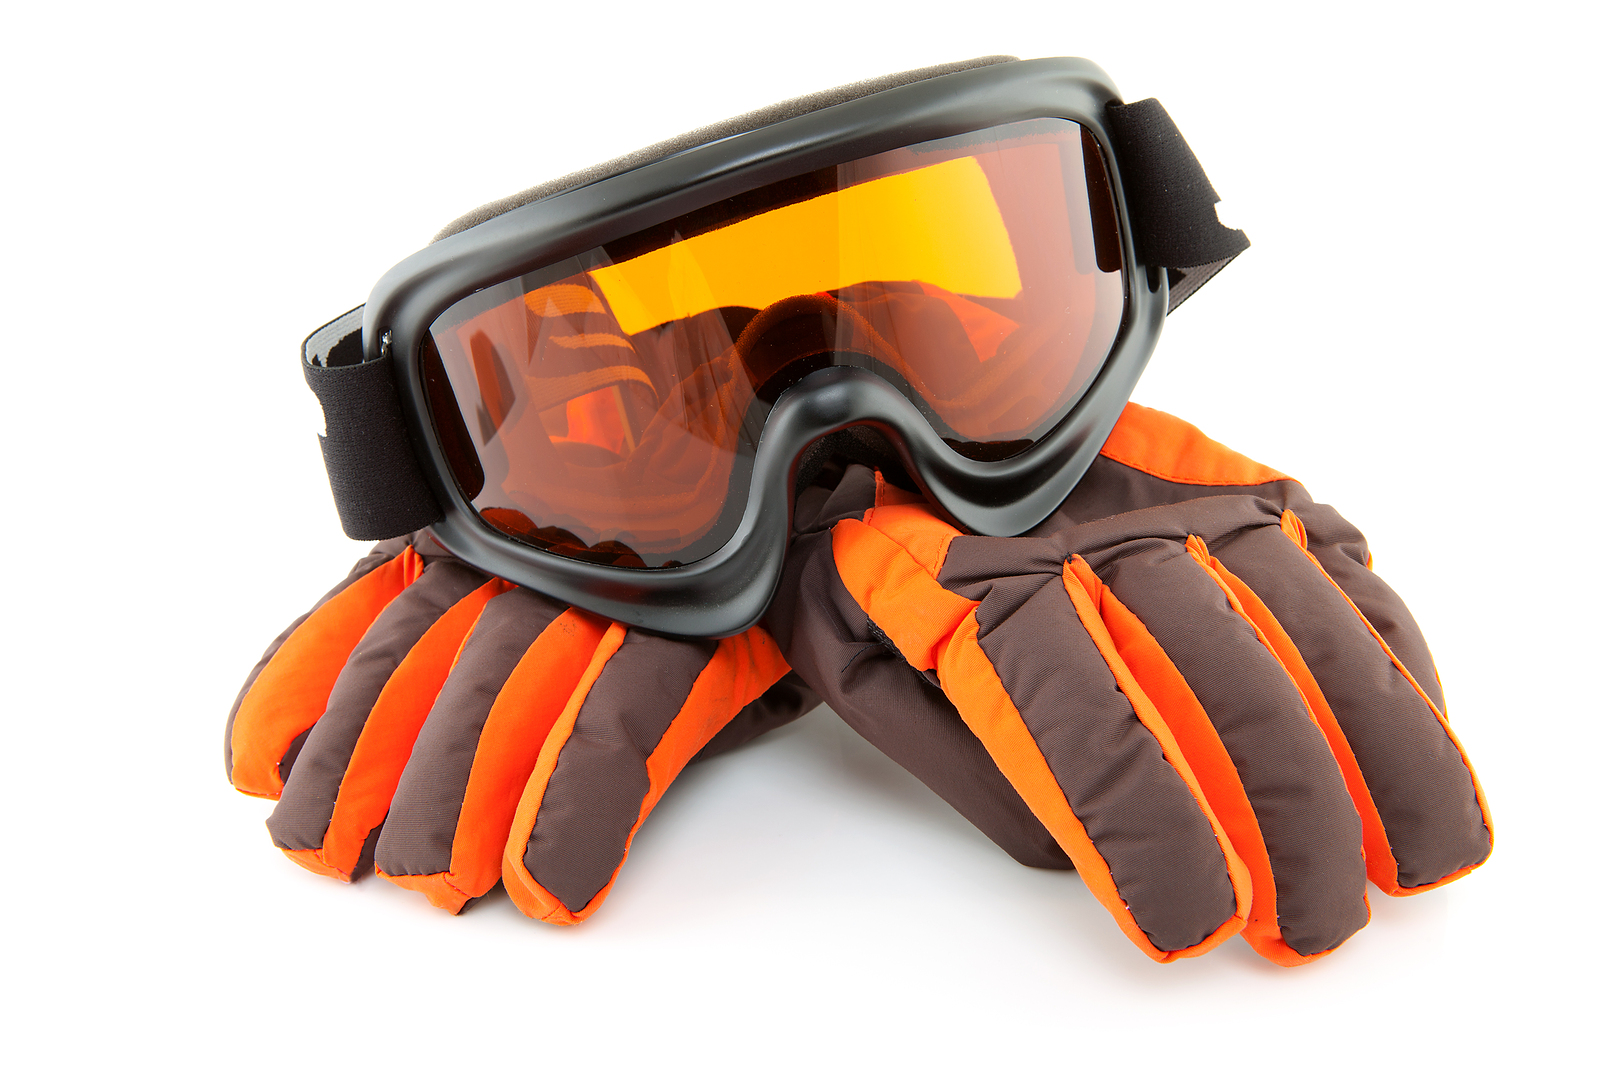 Ski Goggles: How to Choose the Best Frames and Lenses